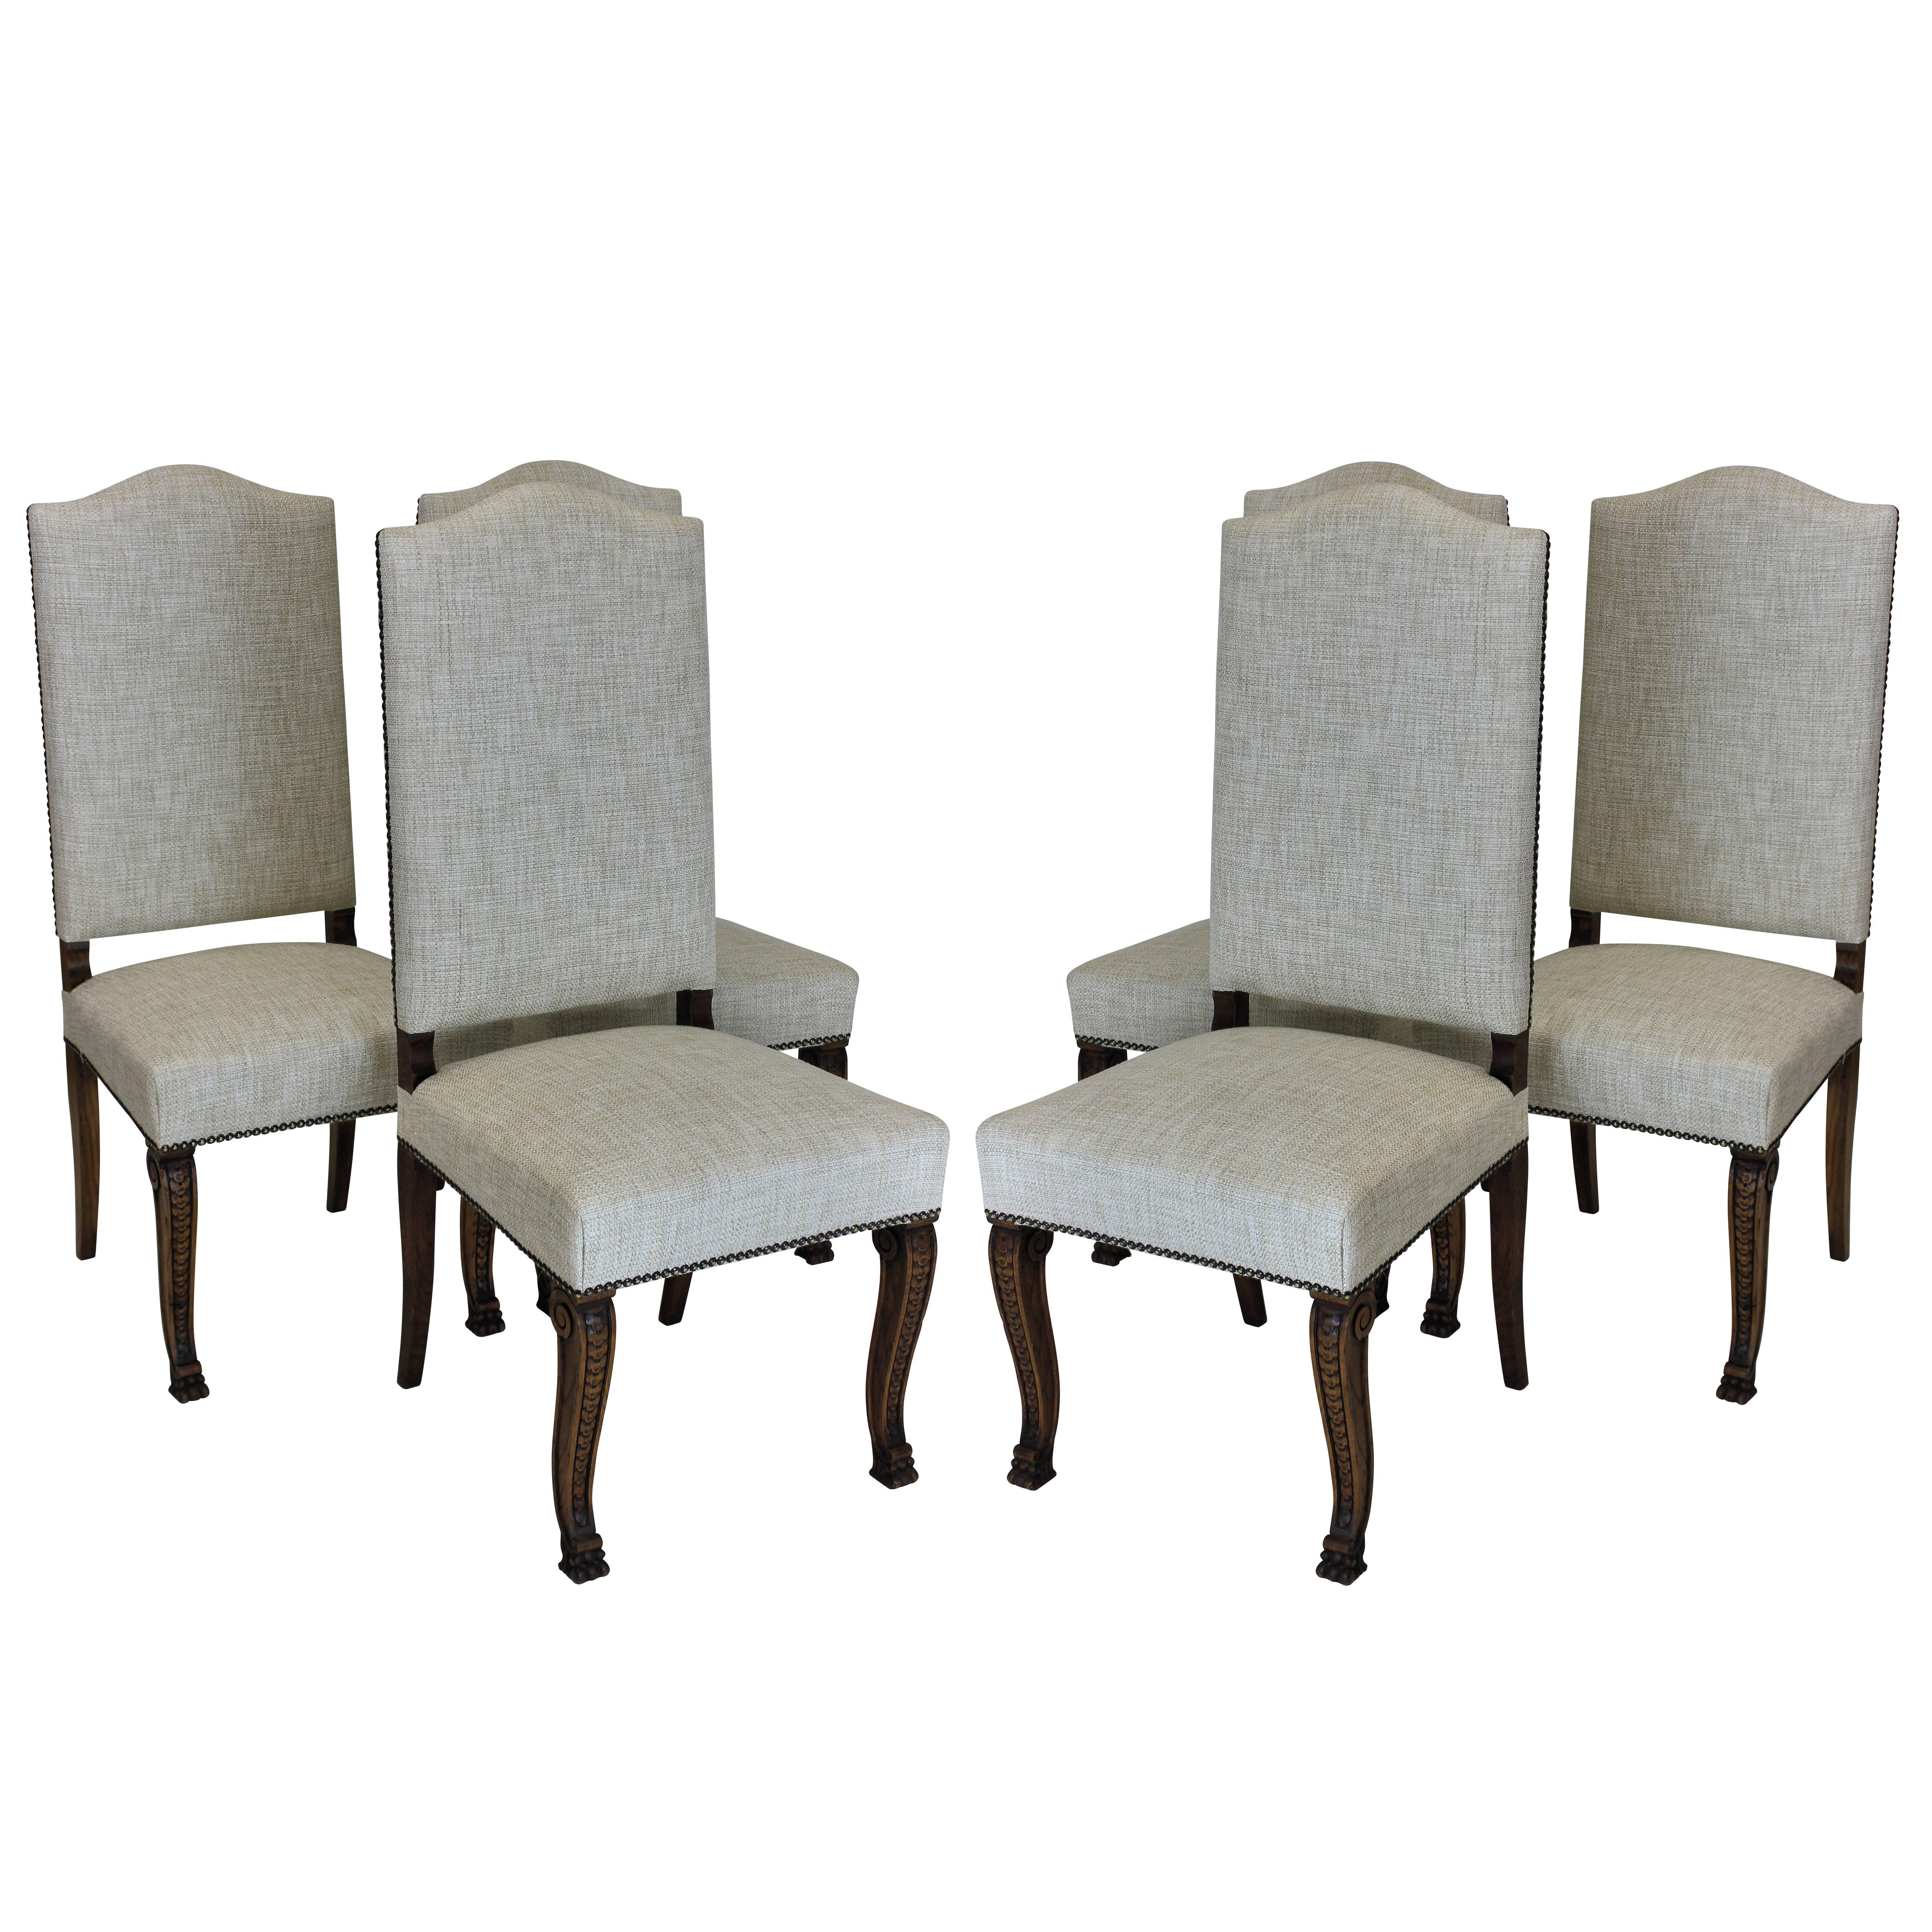 Six French High Back Dining Chairs 